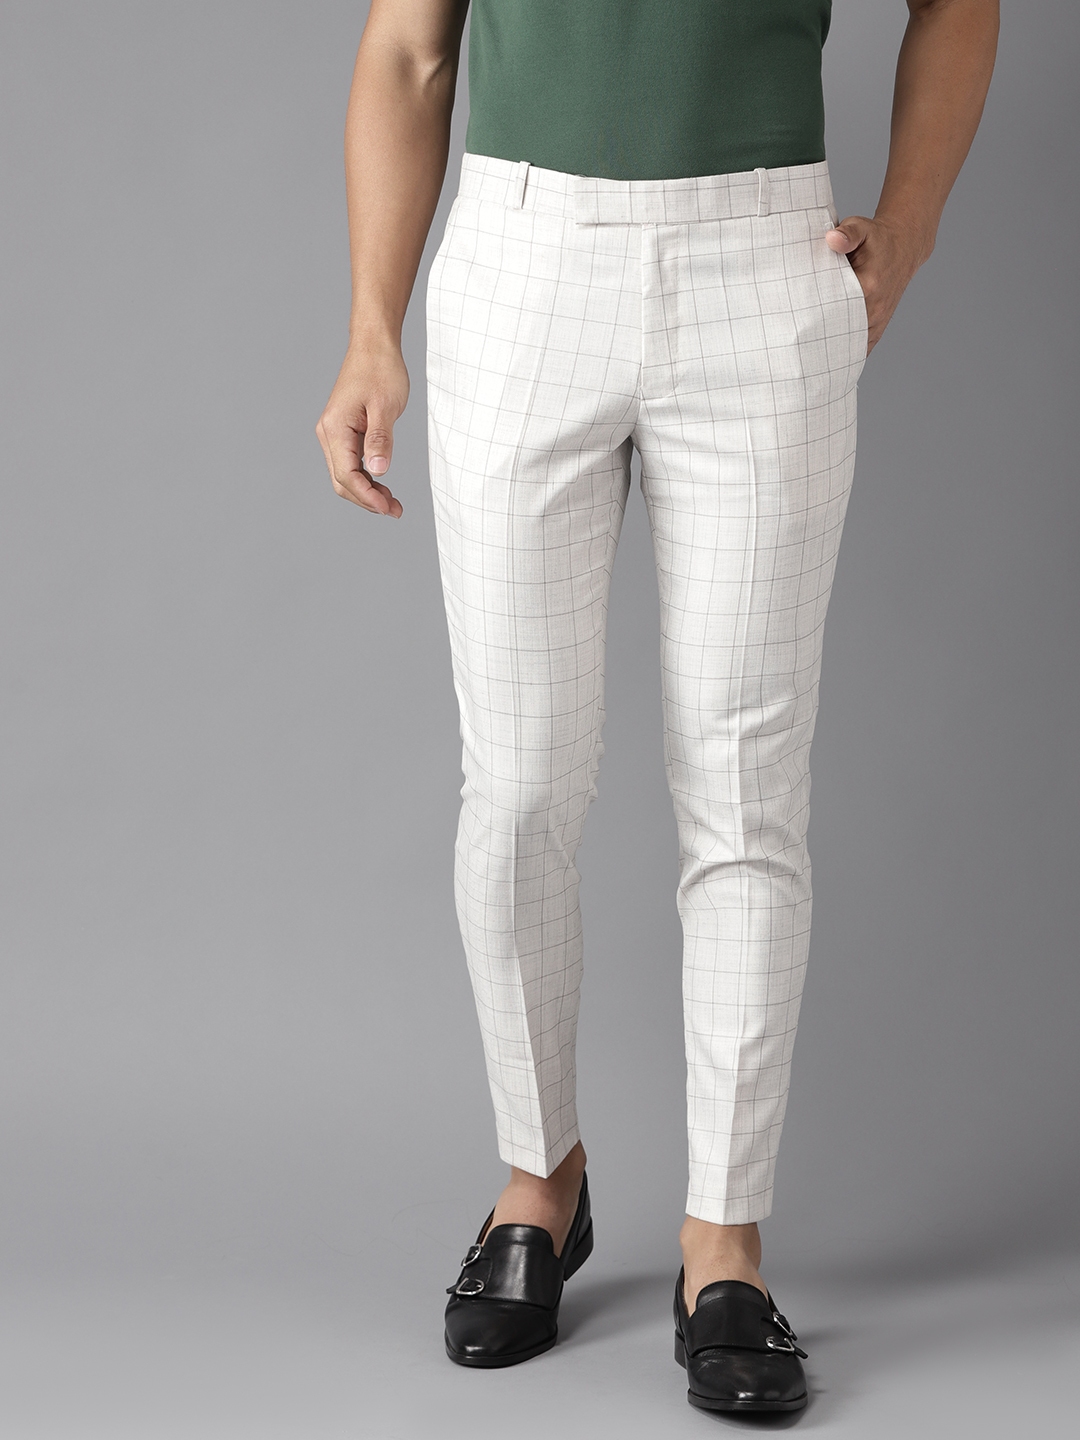 Buy DENNISON Men Off White  Grey Smart Tapered Fit Checked Regular Trousers   Trousers for Men 10173257  Myntra